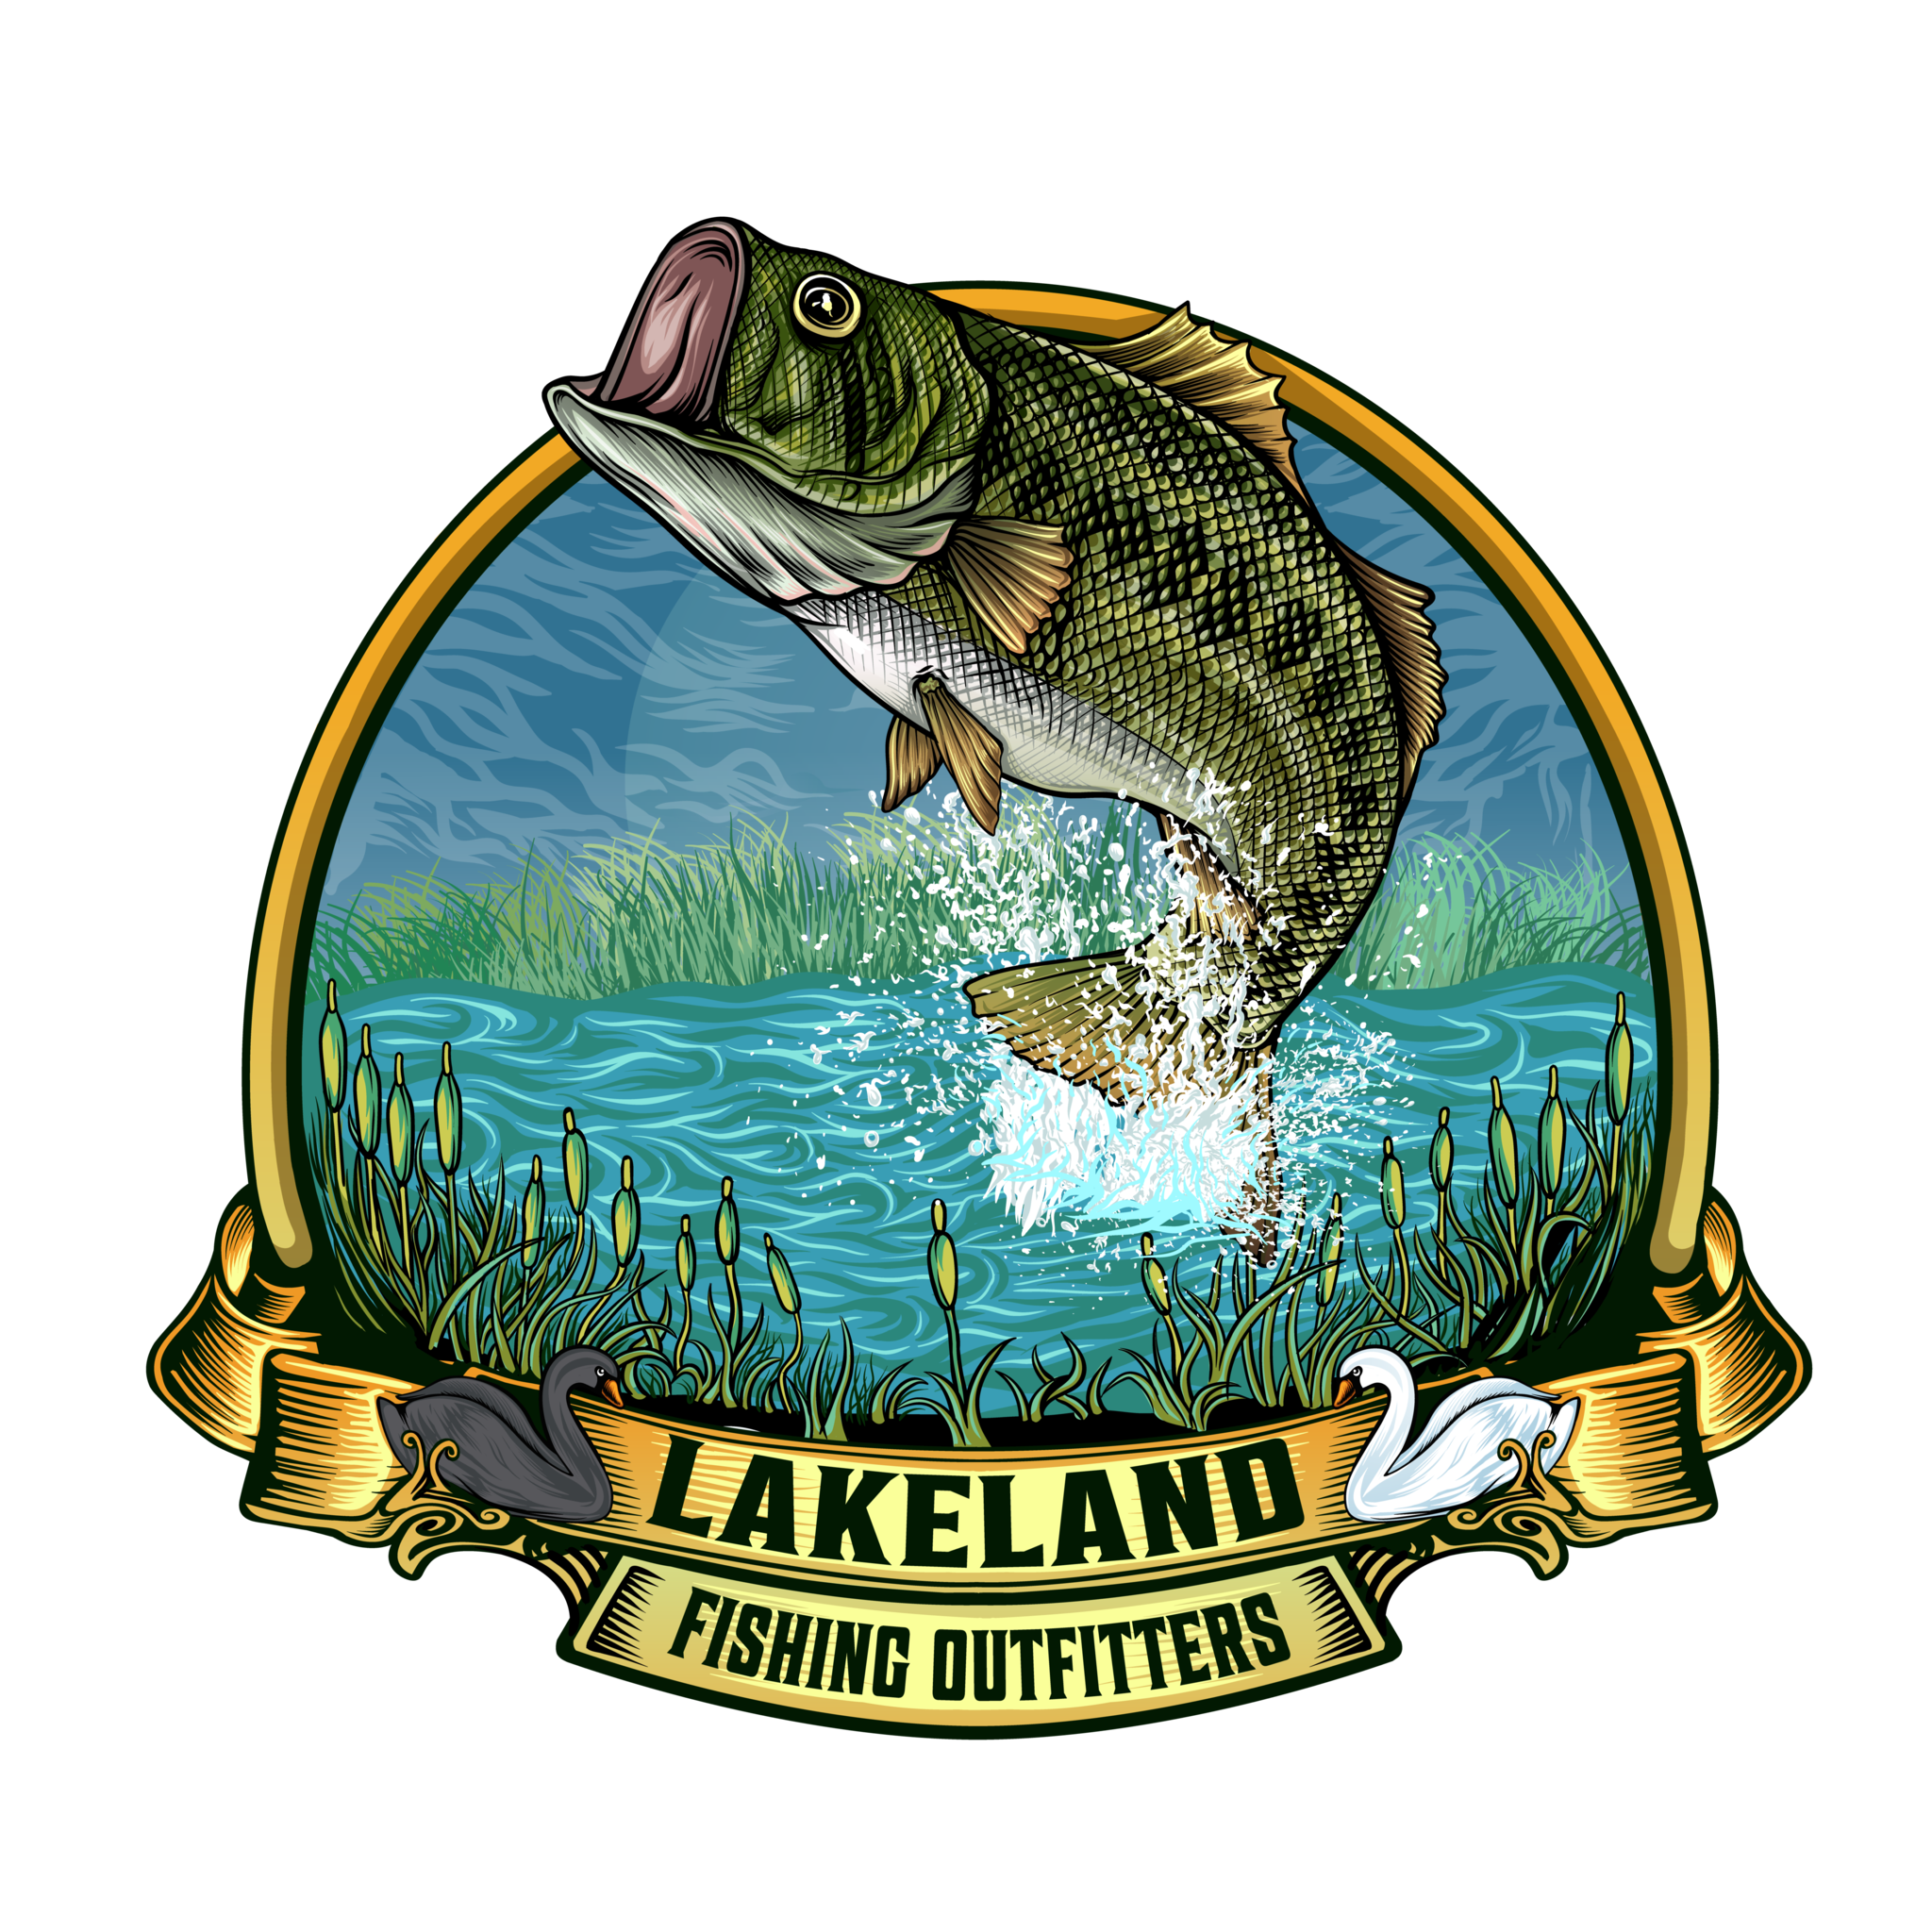 Lakeland Fishing Outfitters Tackle Shop - Florida Fishing Outfitters Tackle  Store